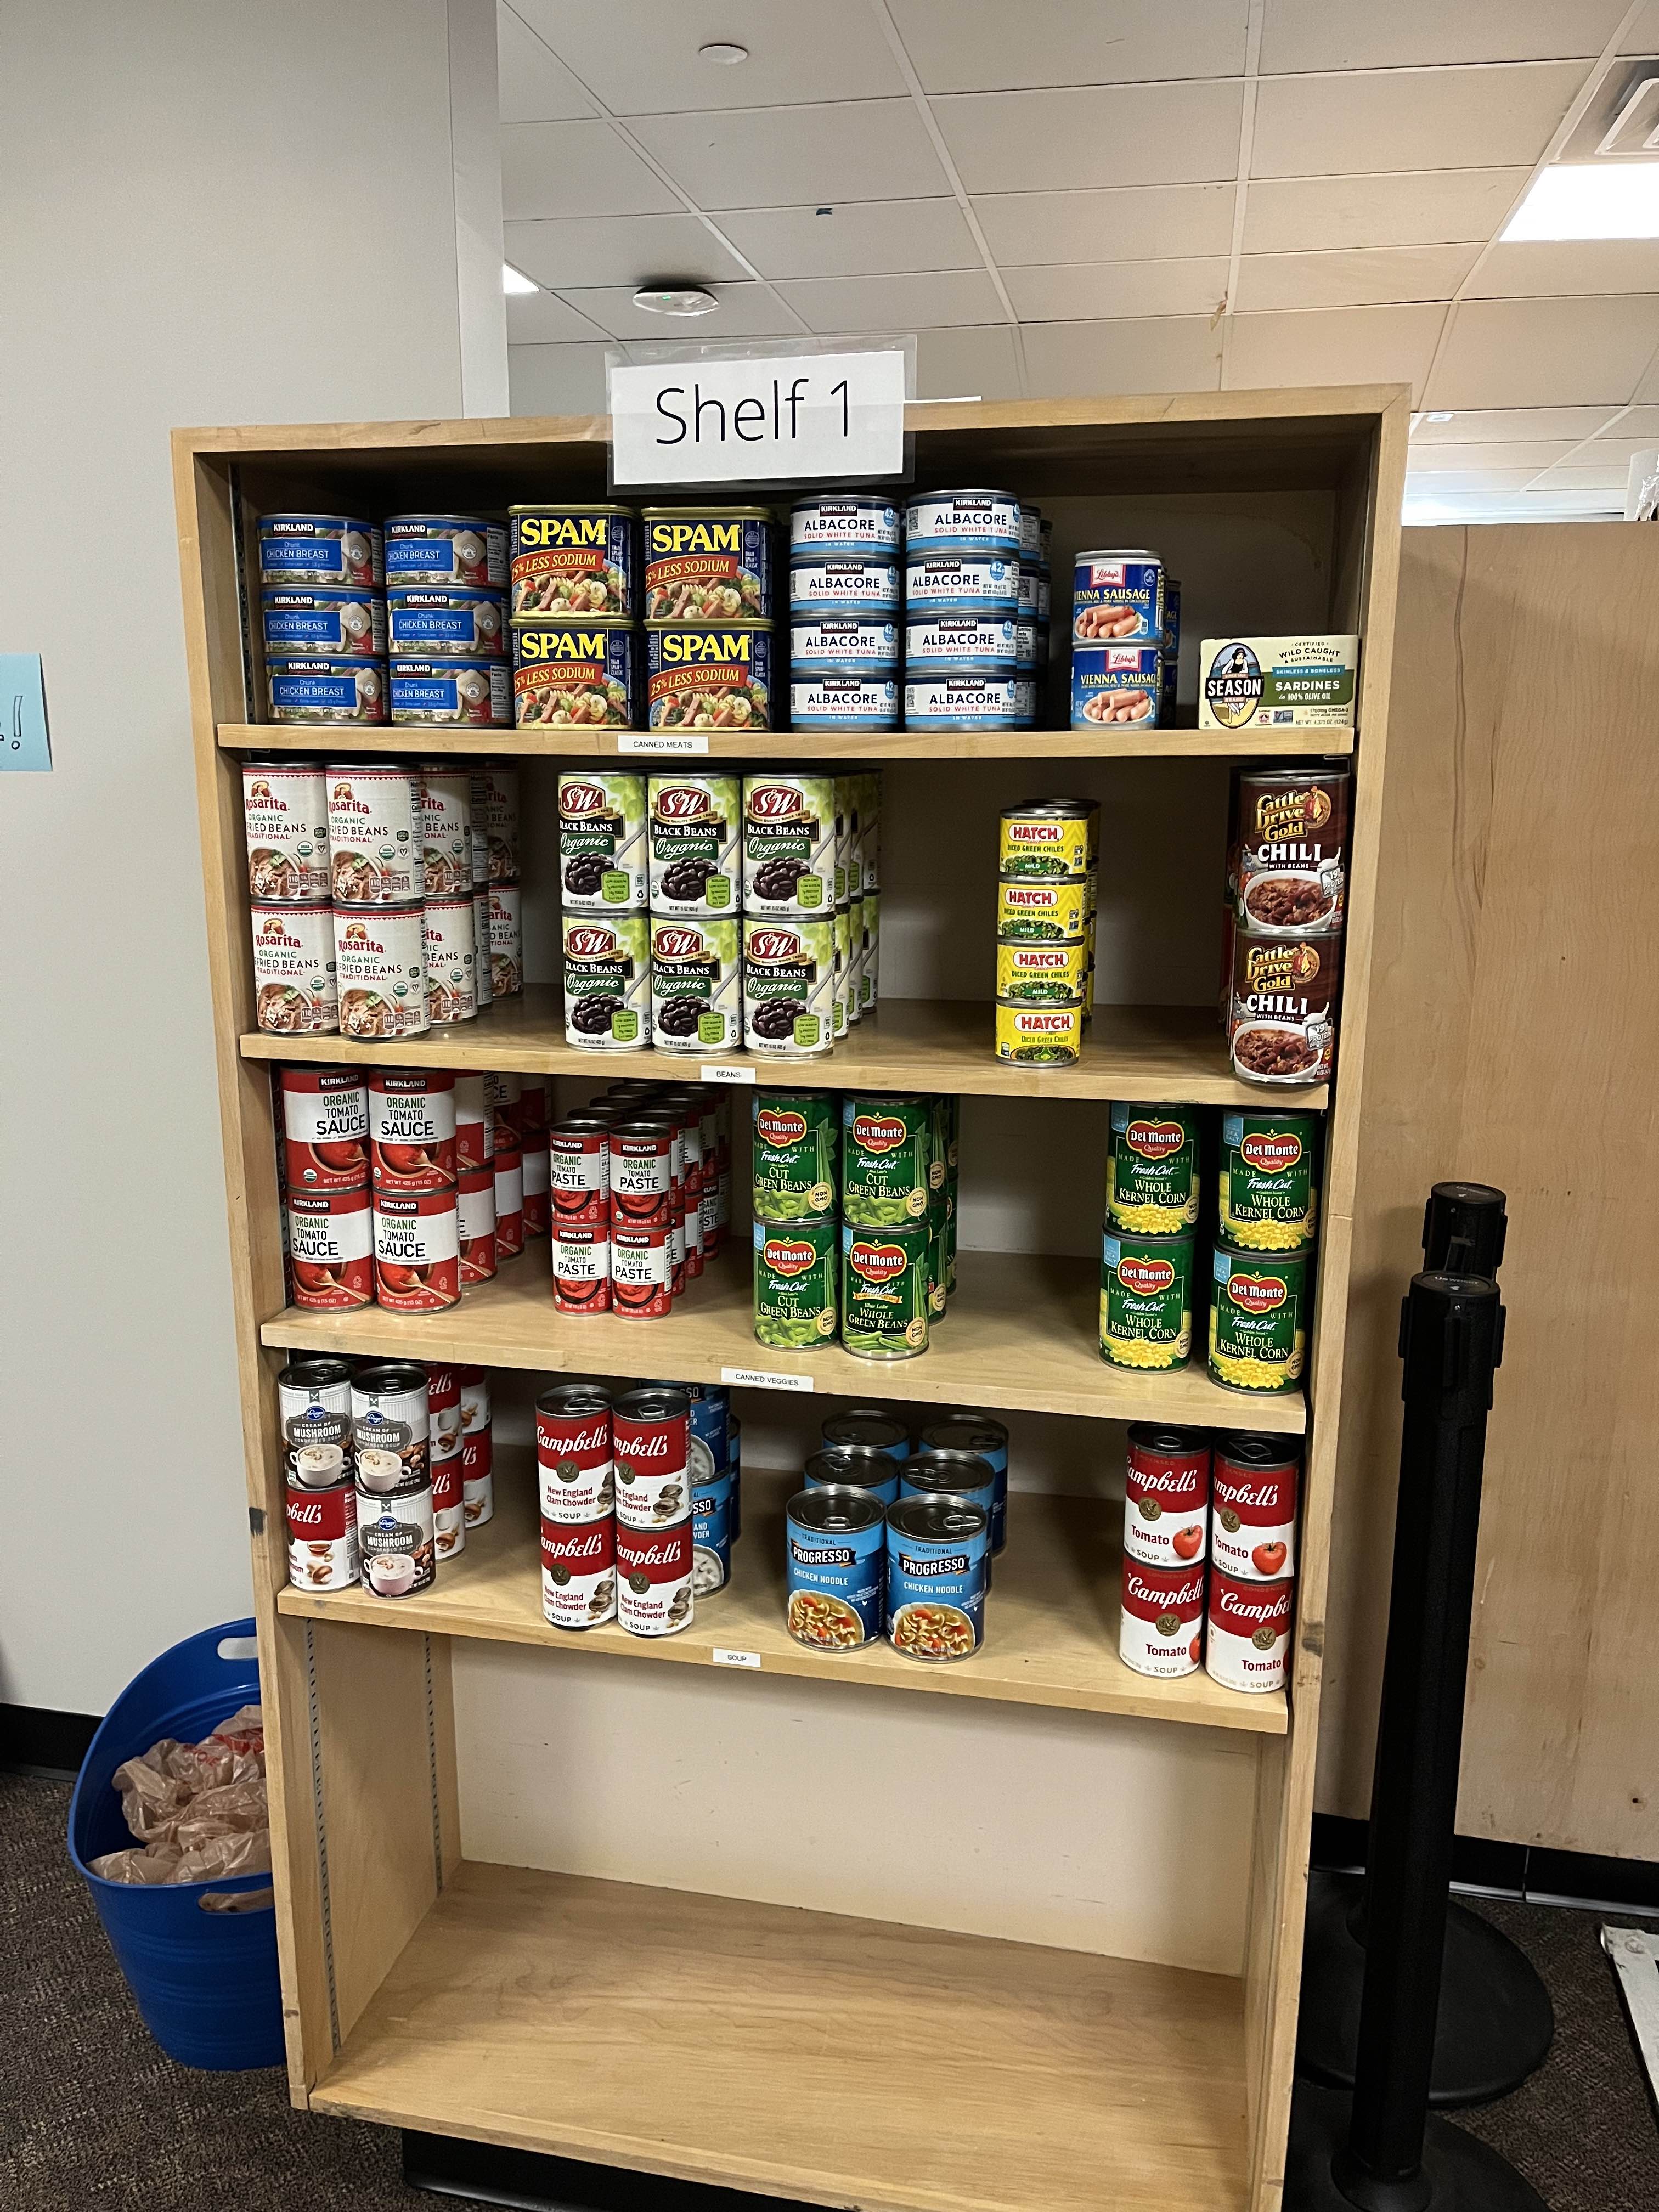 The Pantry is a resource of Campus Activities and is accessed through Worner Campus Center.